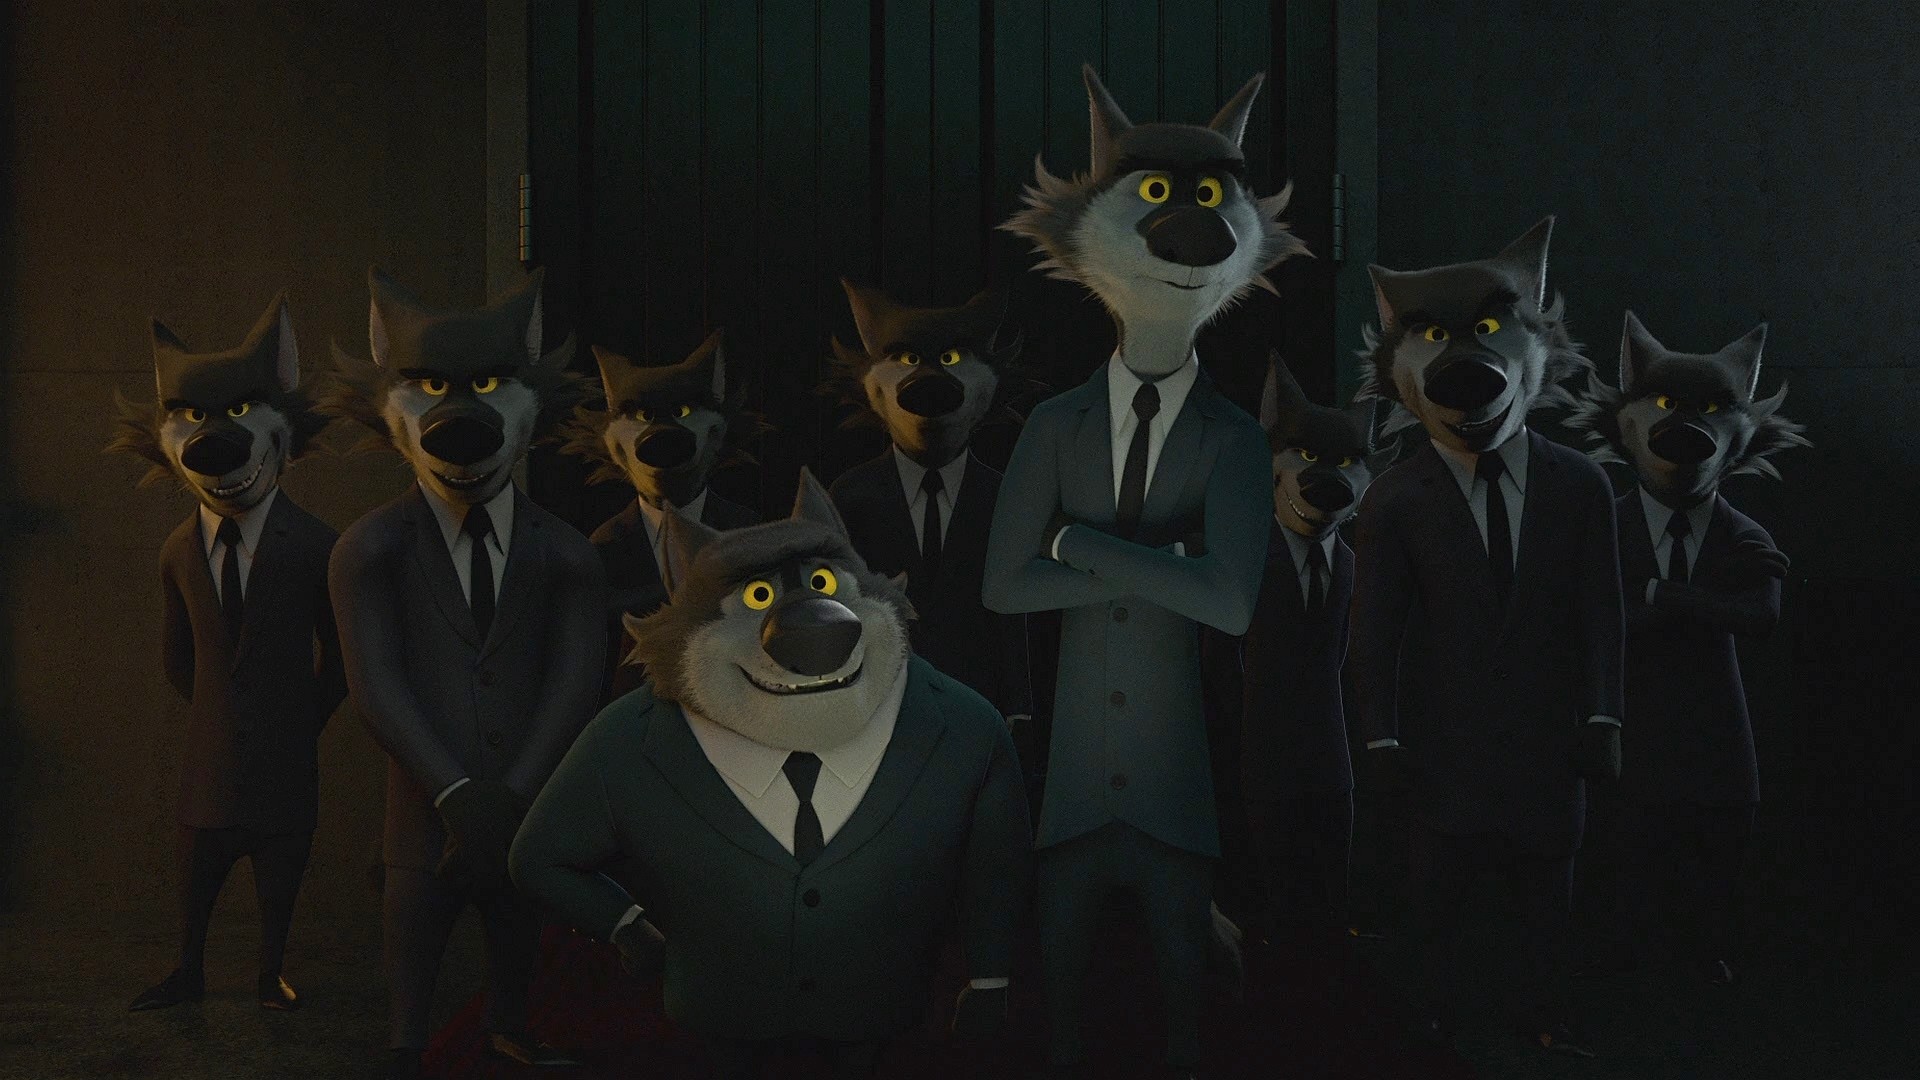 Rock Dog Anthro Animals Wolf 3D Cartoon Movies Suits Clothing Tie Gangsters Gangster Screen Shot Scr 1920x1080